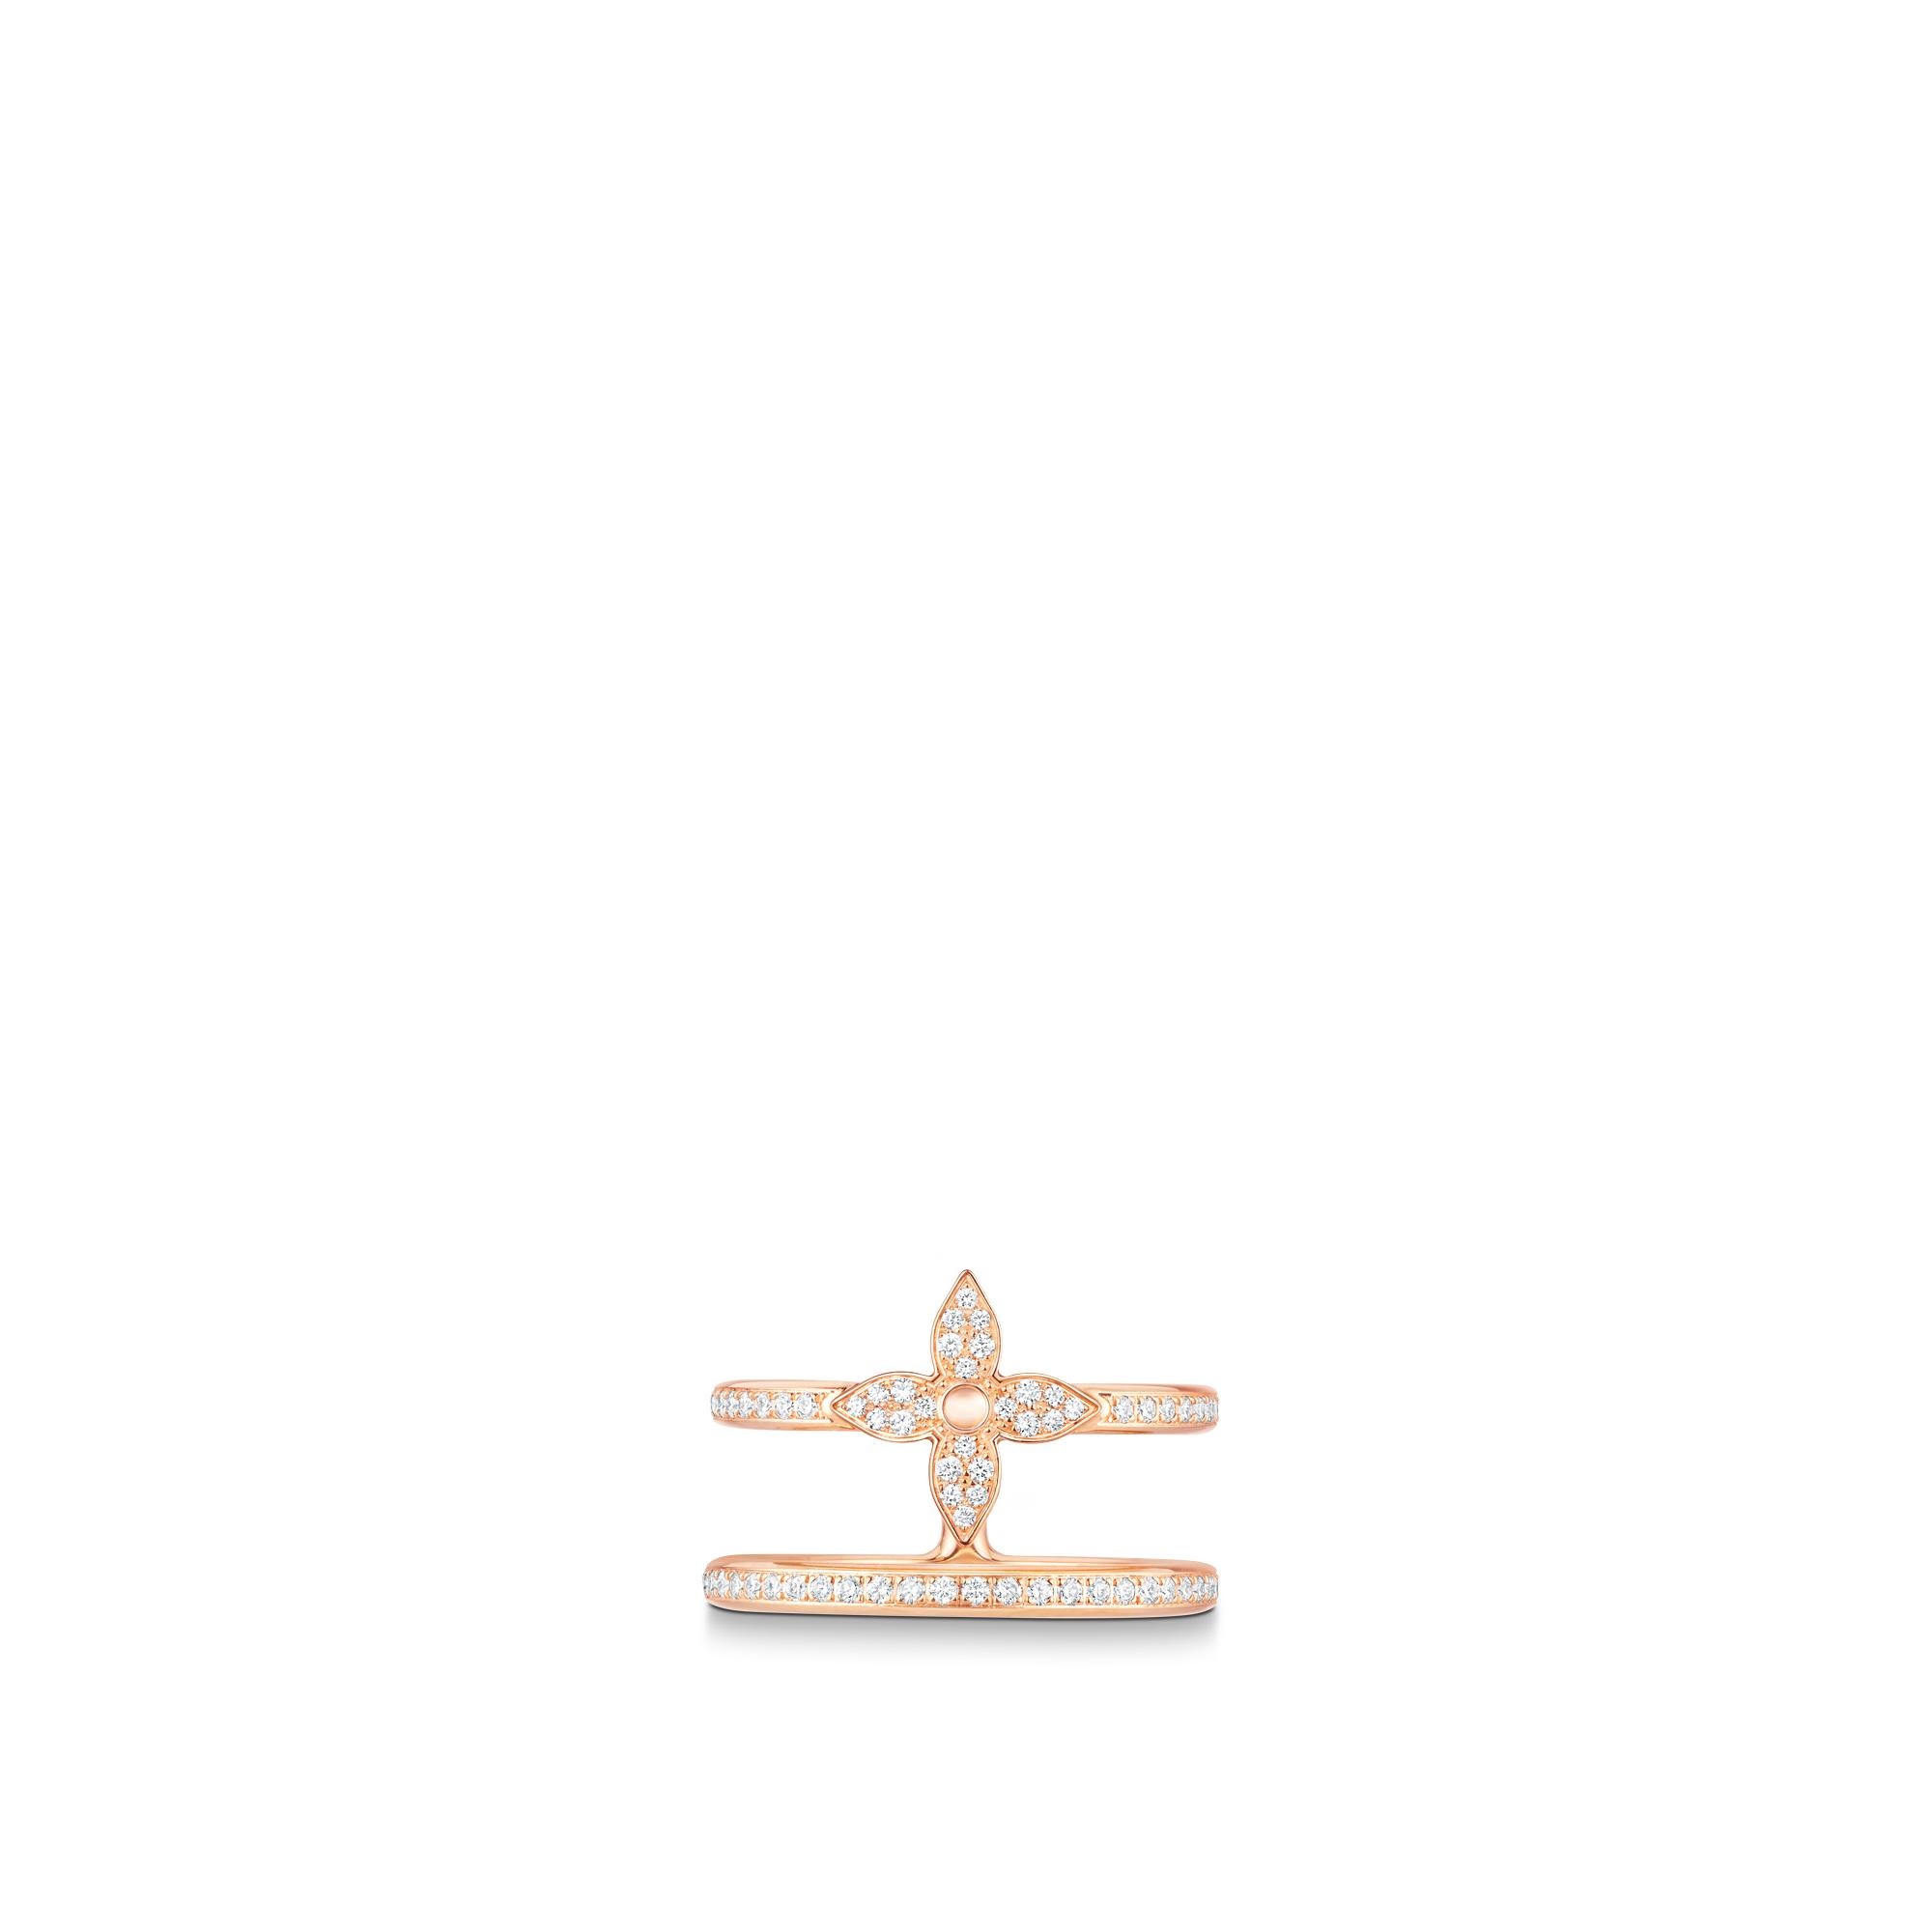 Louis Vuitton Idylle Blossom Paved Ring, 3 Golds and Diamonds Gold. Size 54